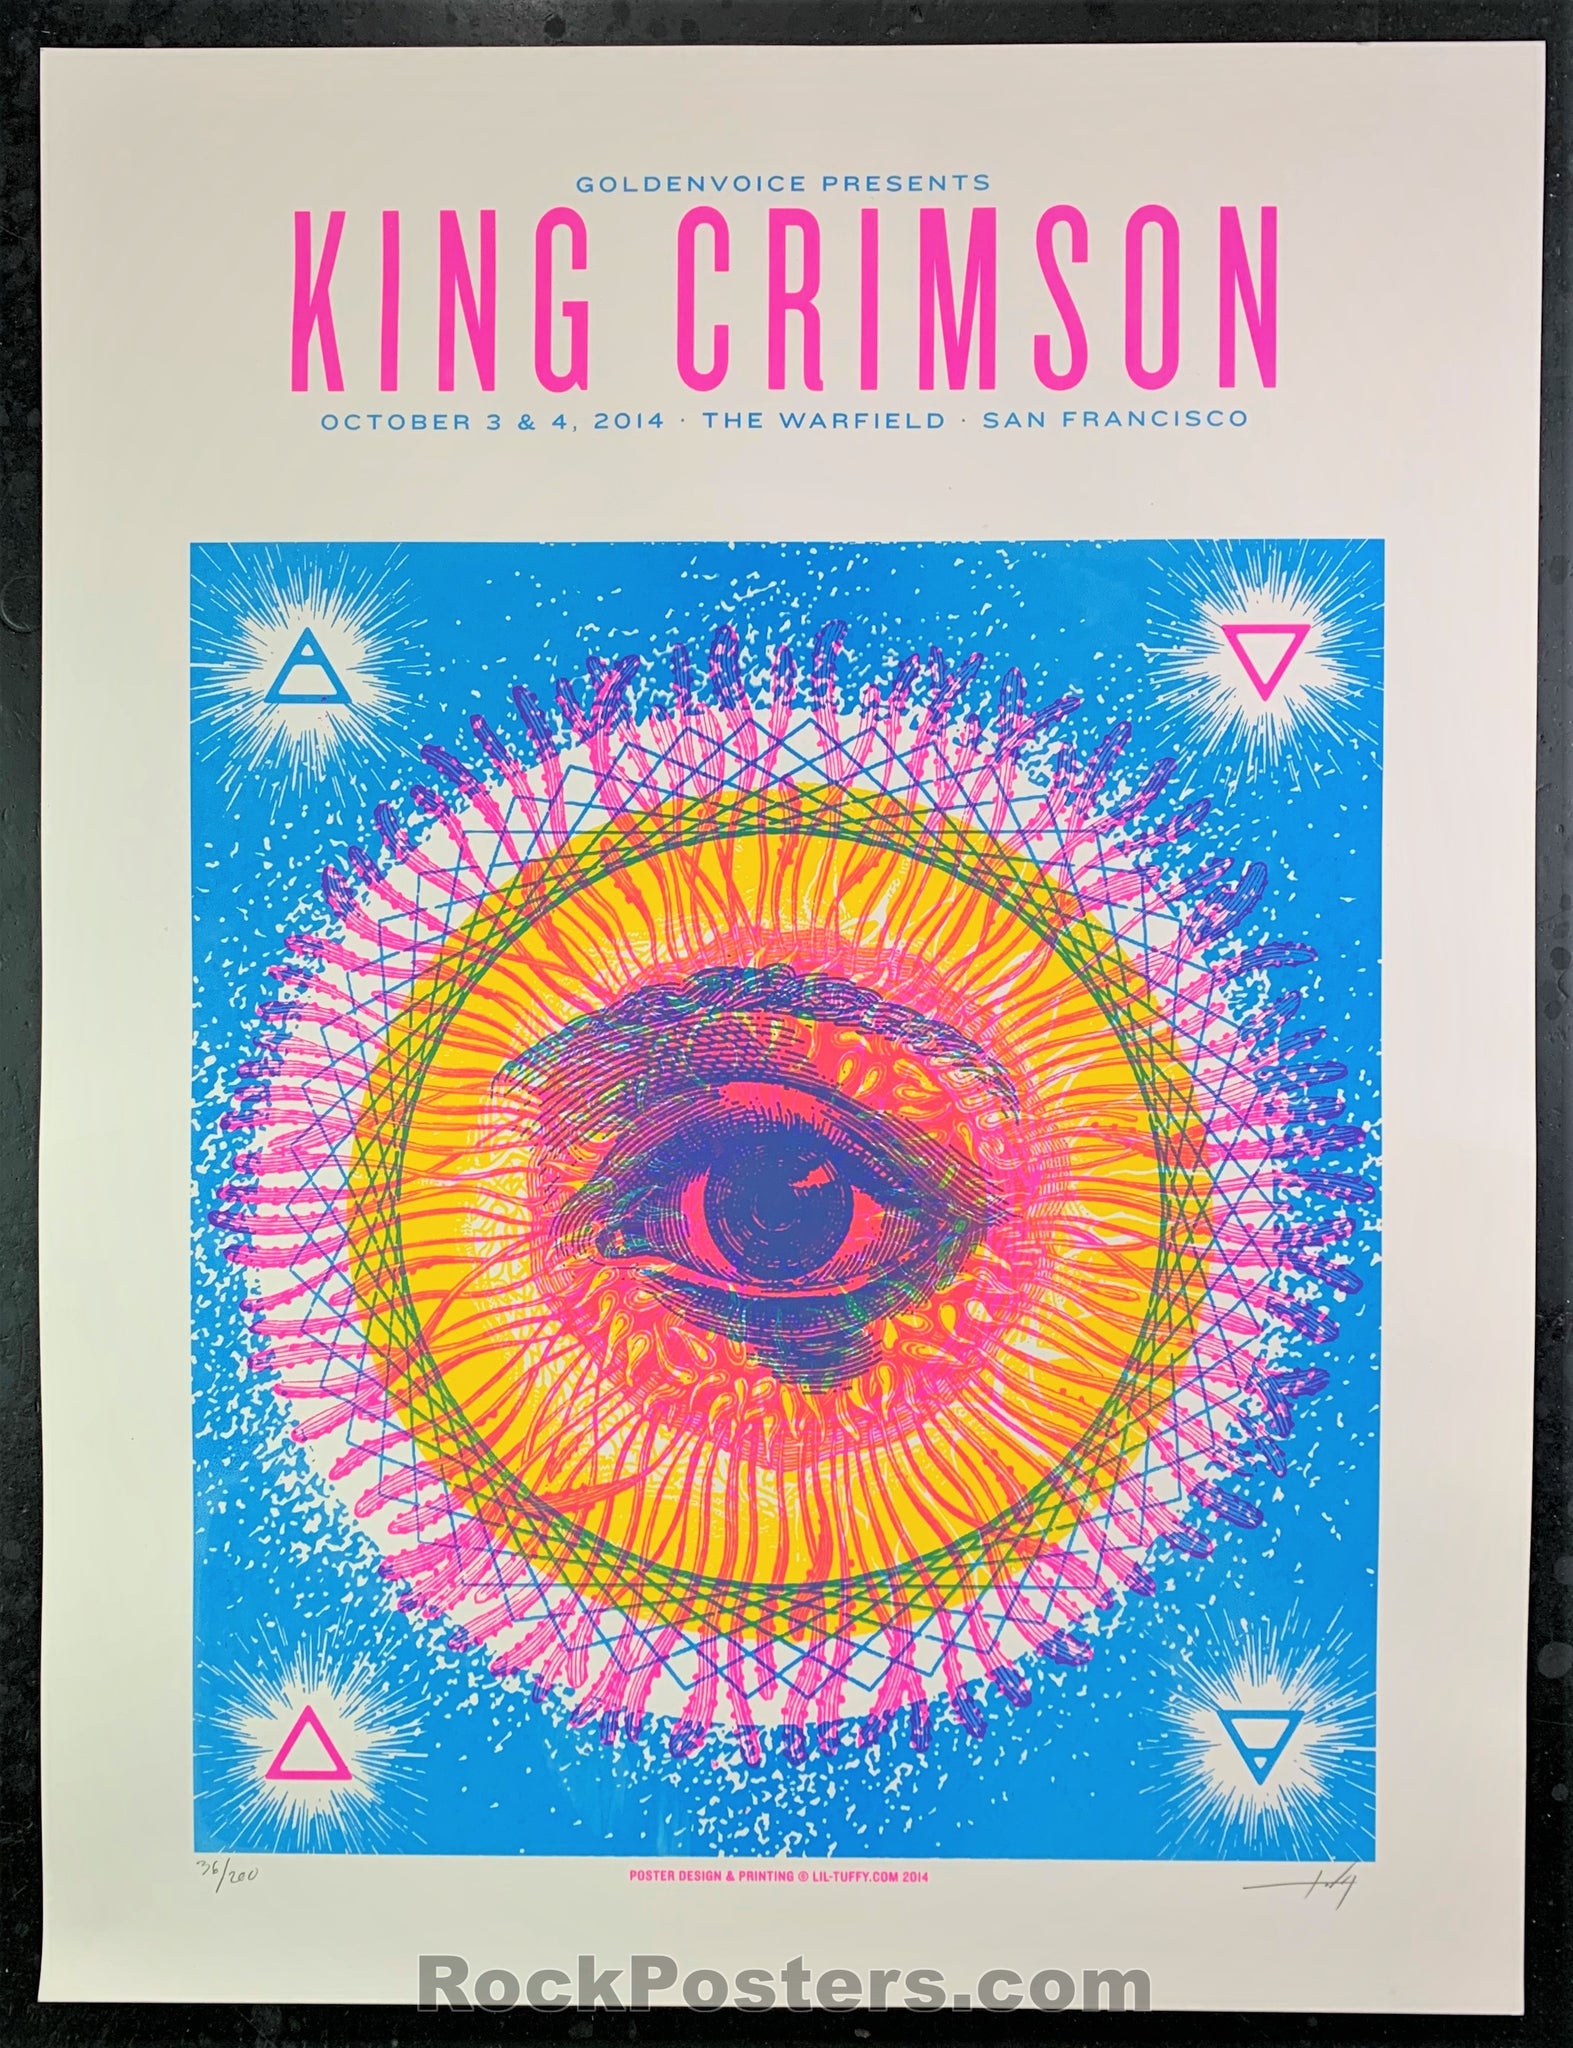 AUCTION - King Crimson - 2014 Warfield Artist Signed Poster - Condition - Near Mint Minus